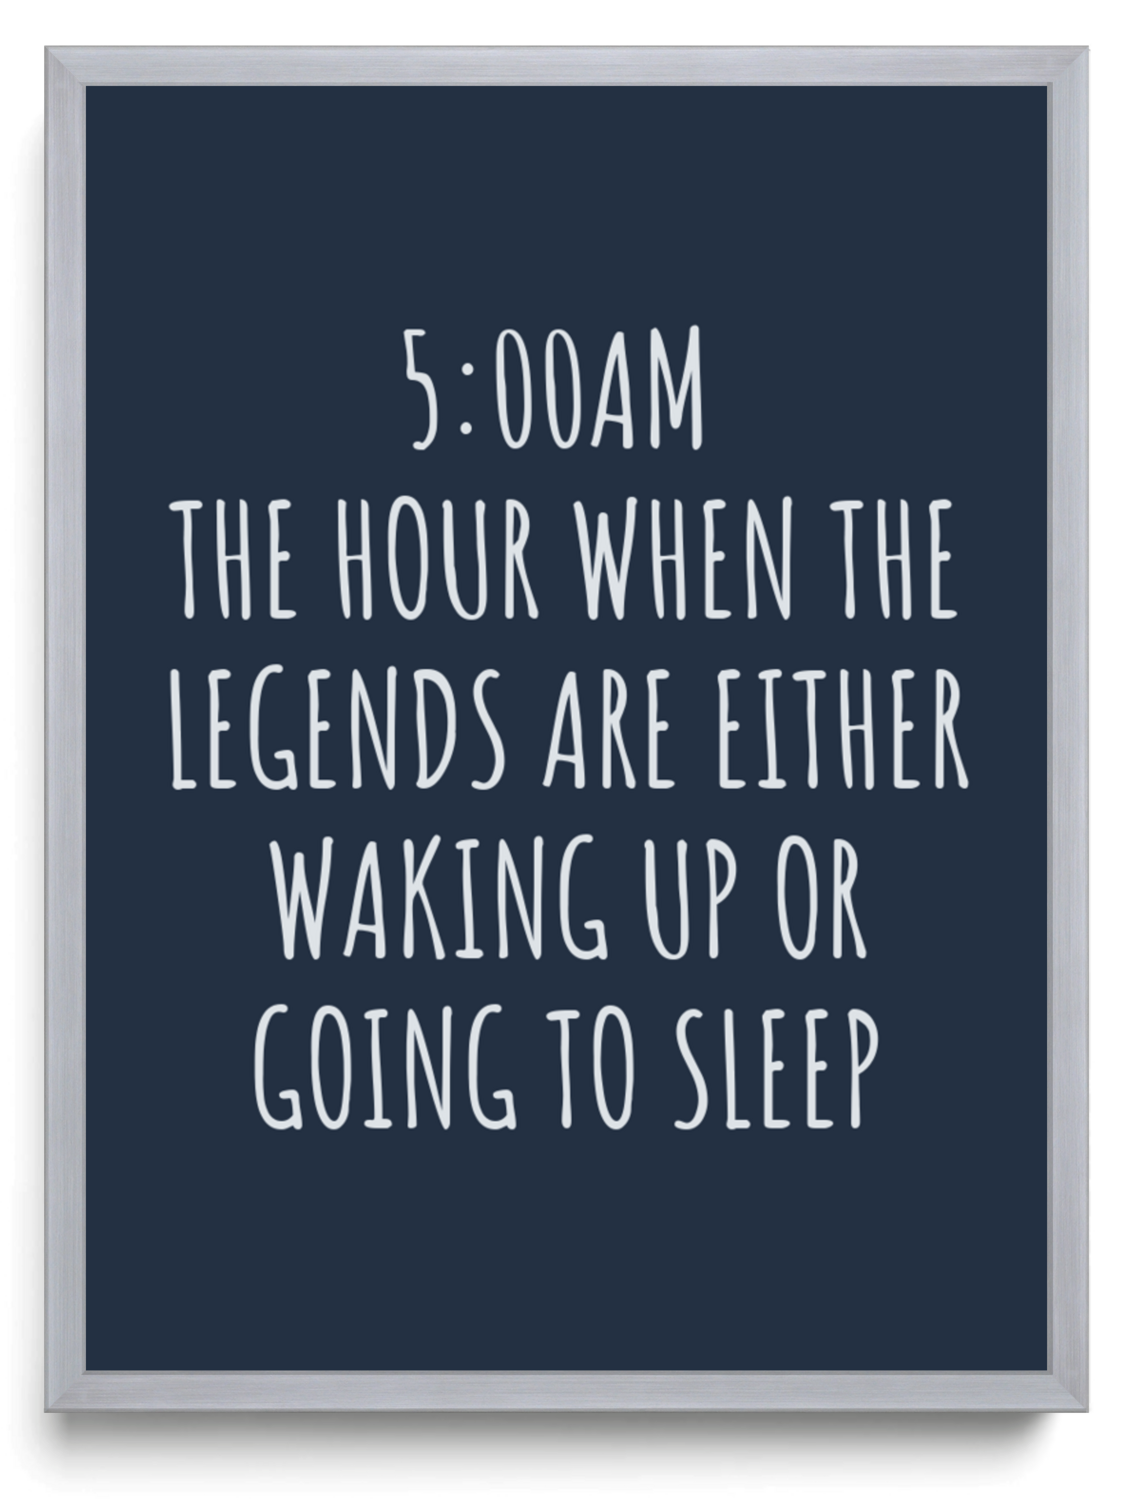 5:00 AM THE HOUR WHEN THE LEGENDS ARE EITHER WAKING UP OR GOING TO SLEEP framed typographic print